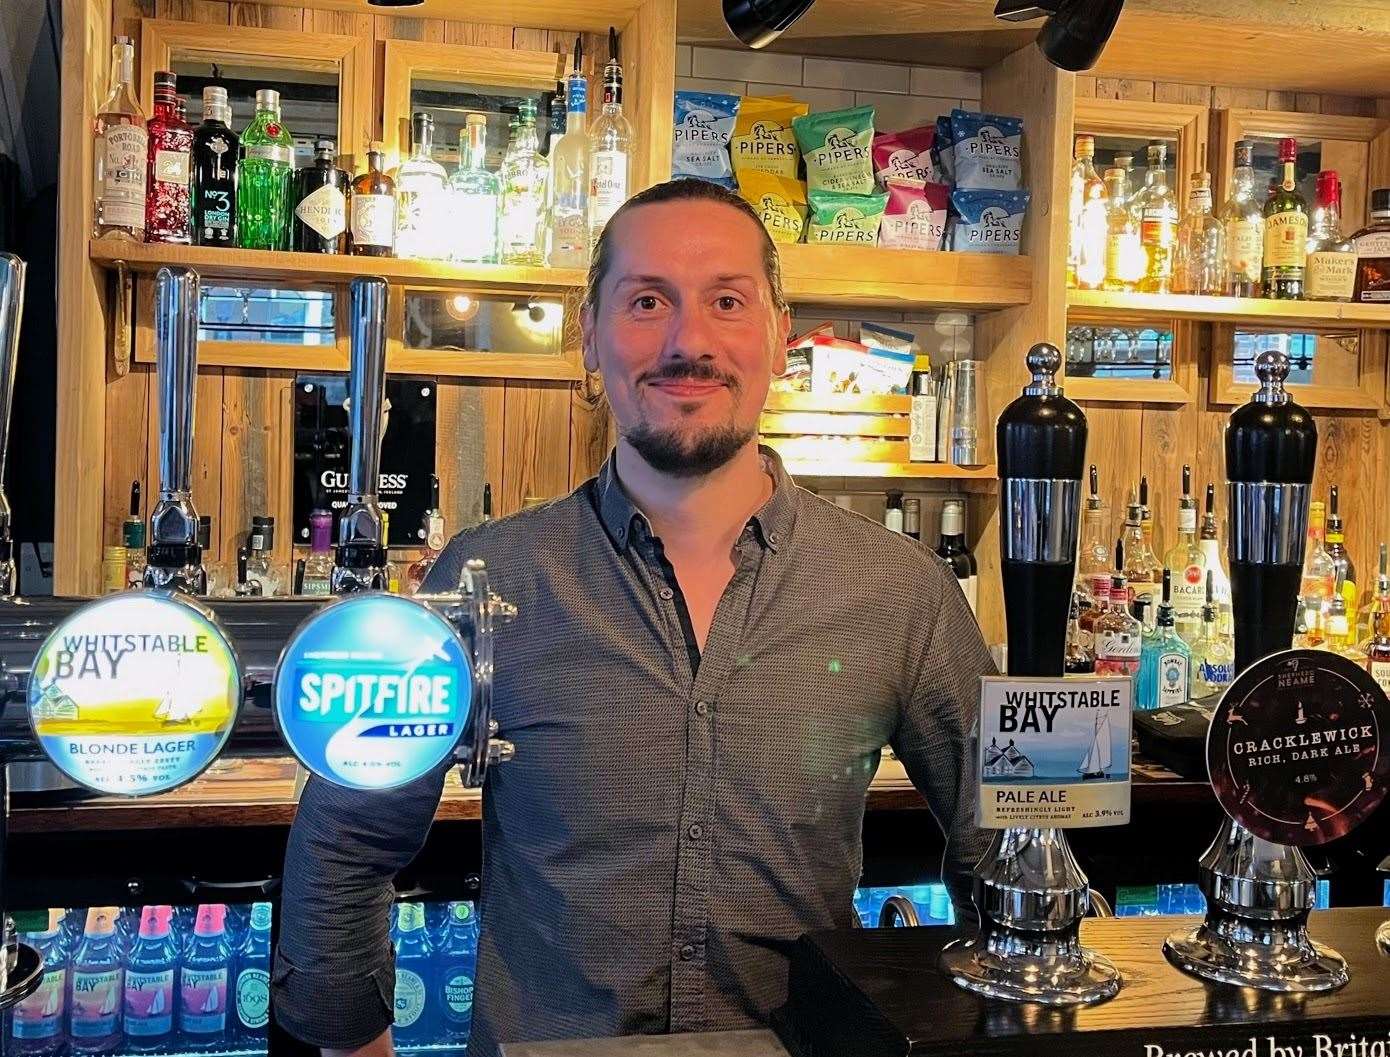 Philippe Laché is now the General Manager at the Market House in Maidstone